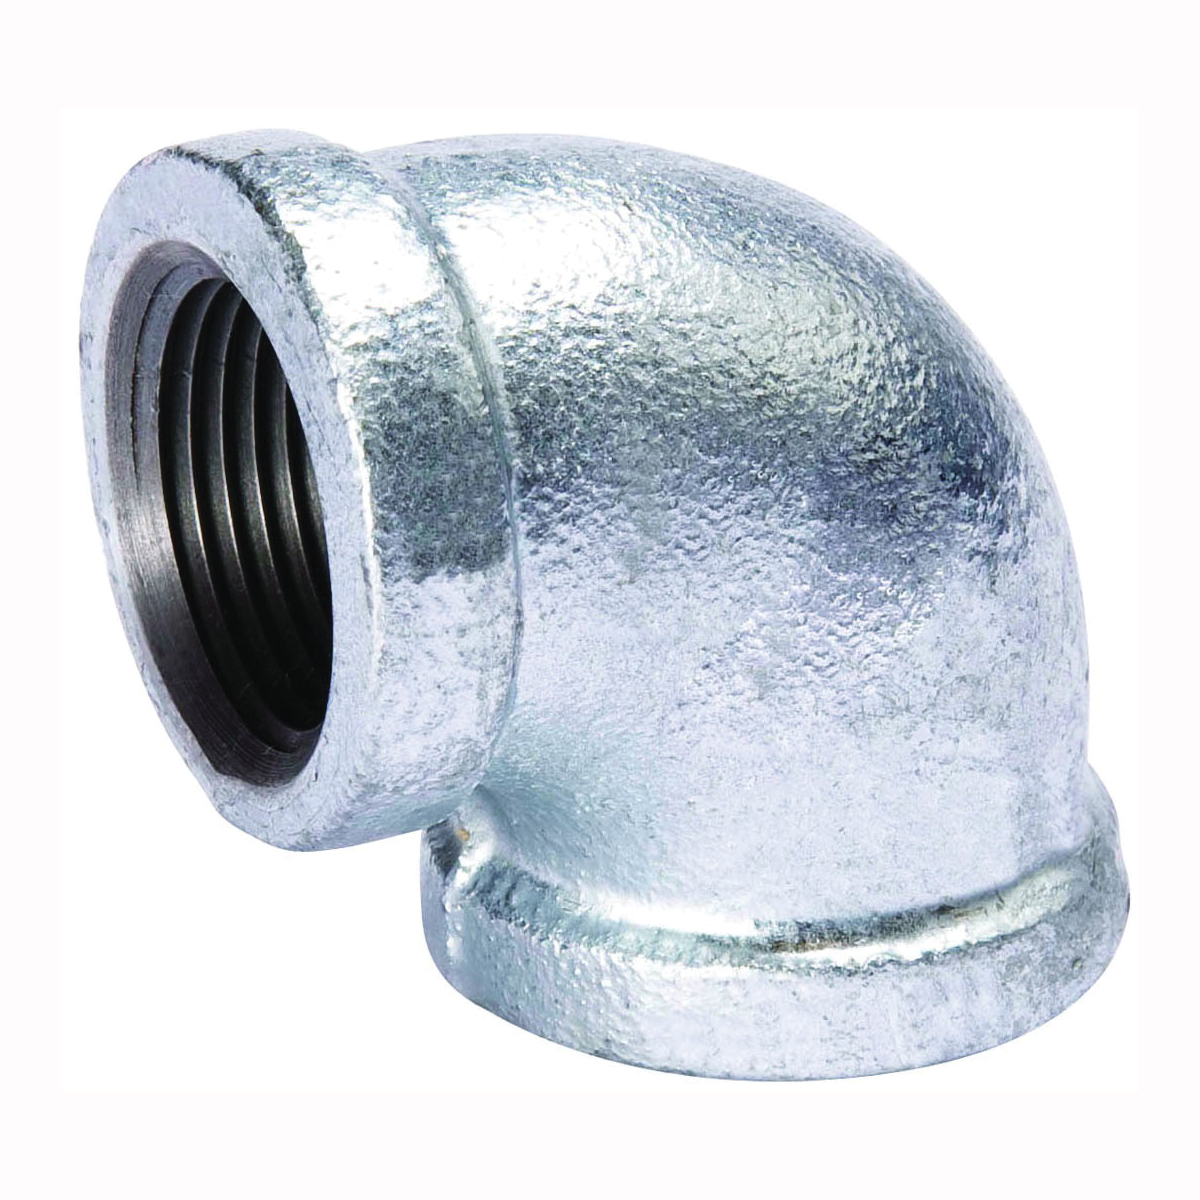 510-010BC Pipe Elbow, 3 in, Threaded, 90 deg Angle, 300 psi Pressure